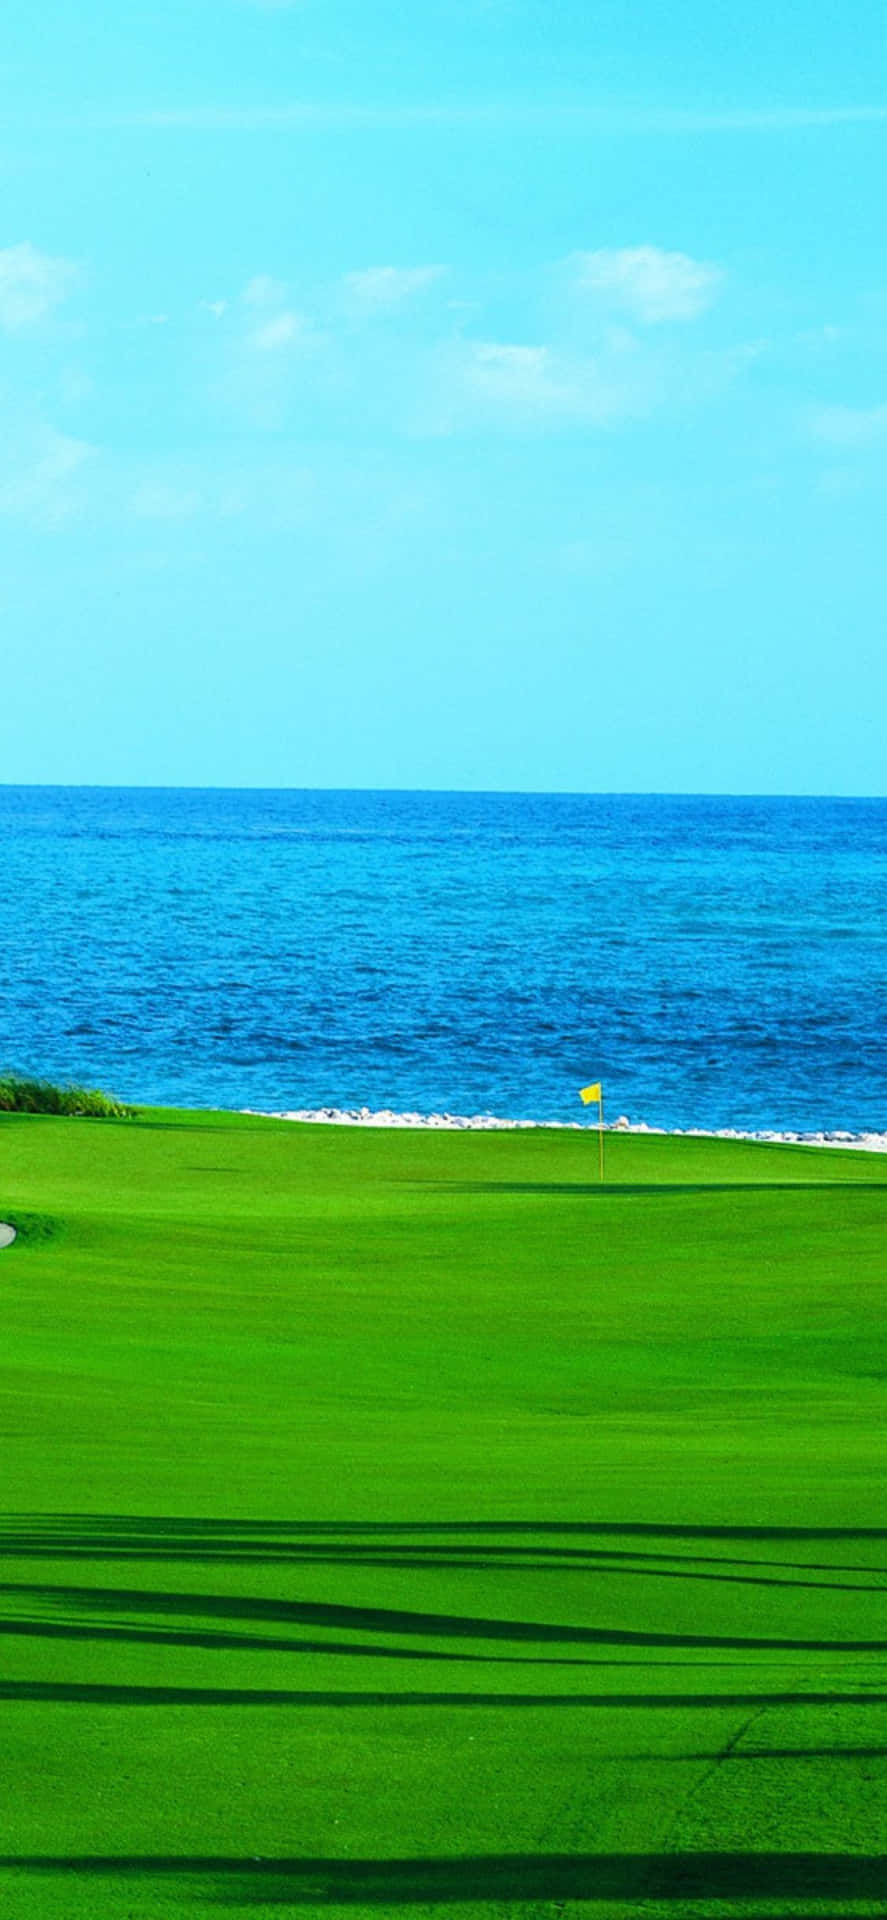 Iphone Xs Golf Background Next To Sea Background